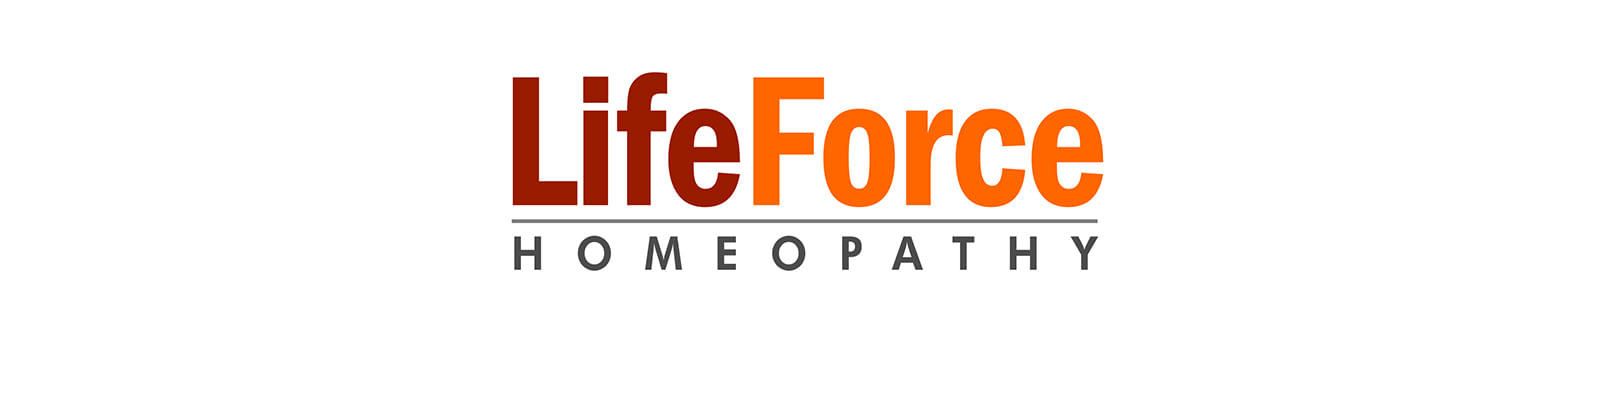 Life Force Homeopathy - Thane